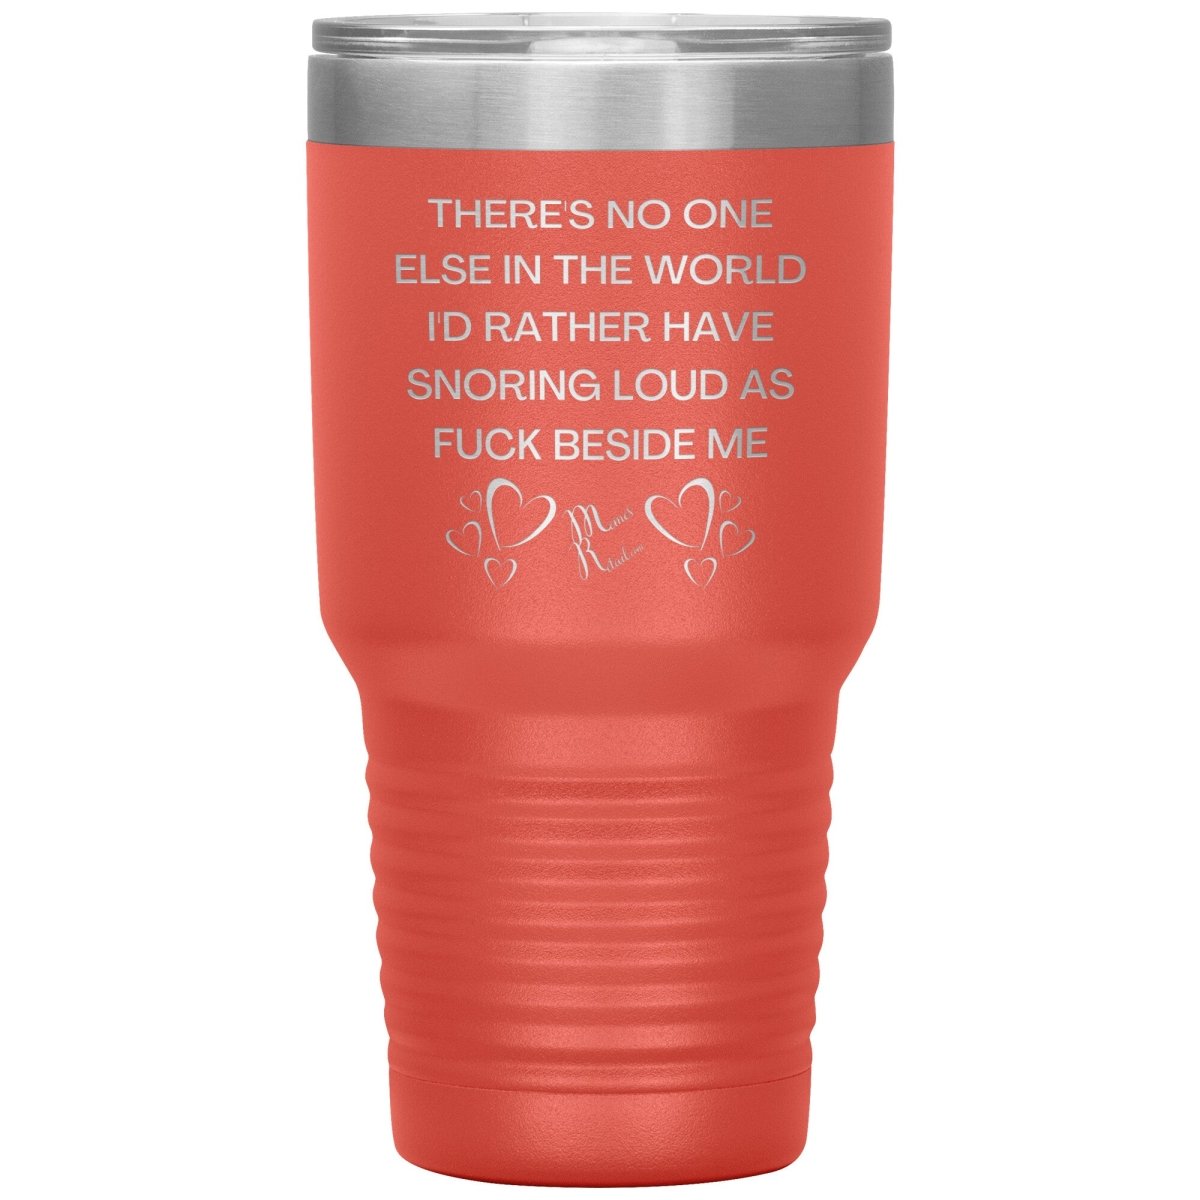 There's No One Else in the World I'd Rather Have Snoring Loud, 30oz Insulated Tumbler / Coral - MemesRetail.com